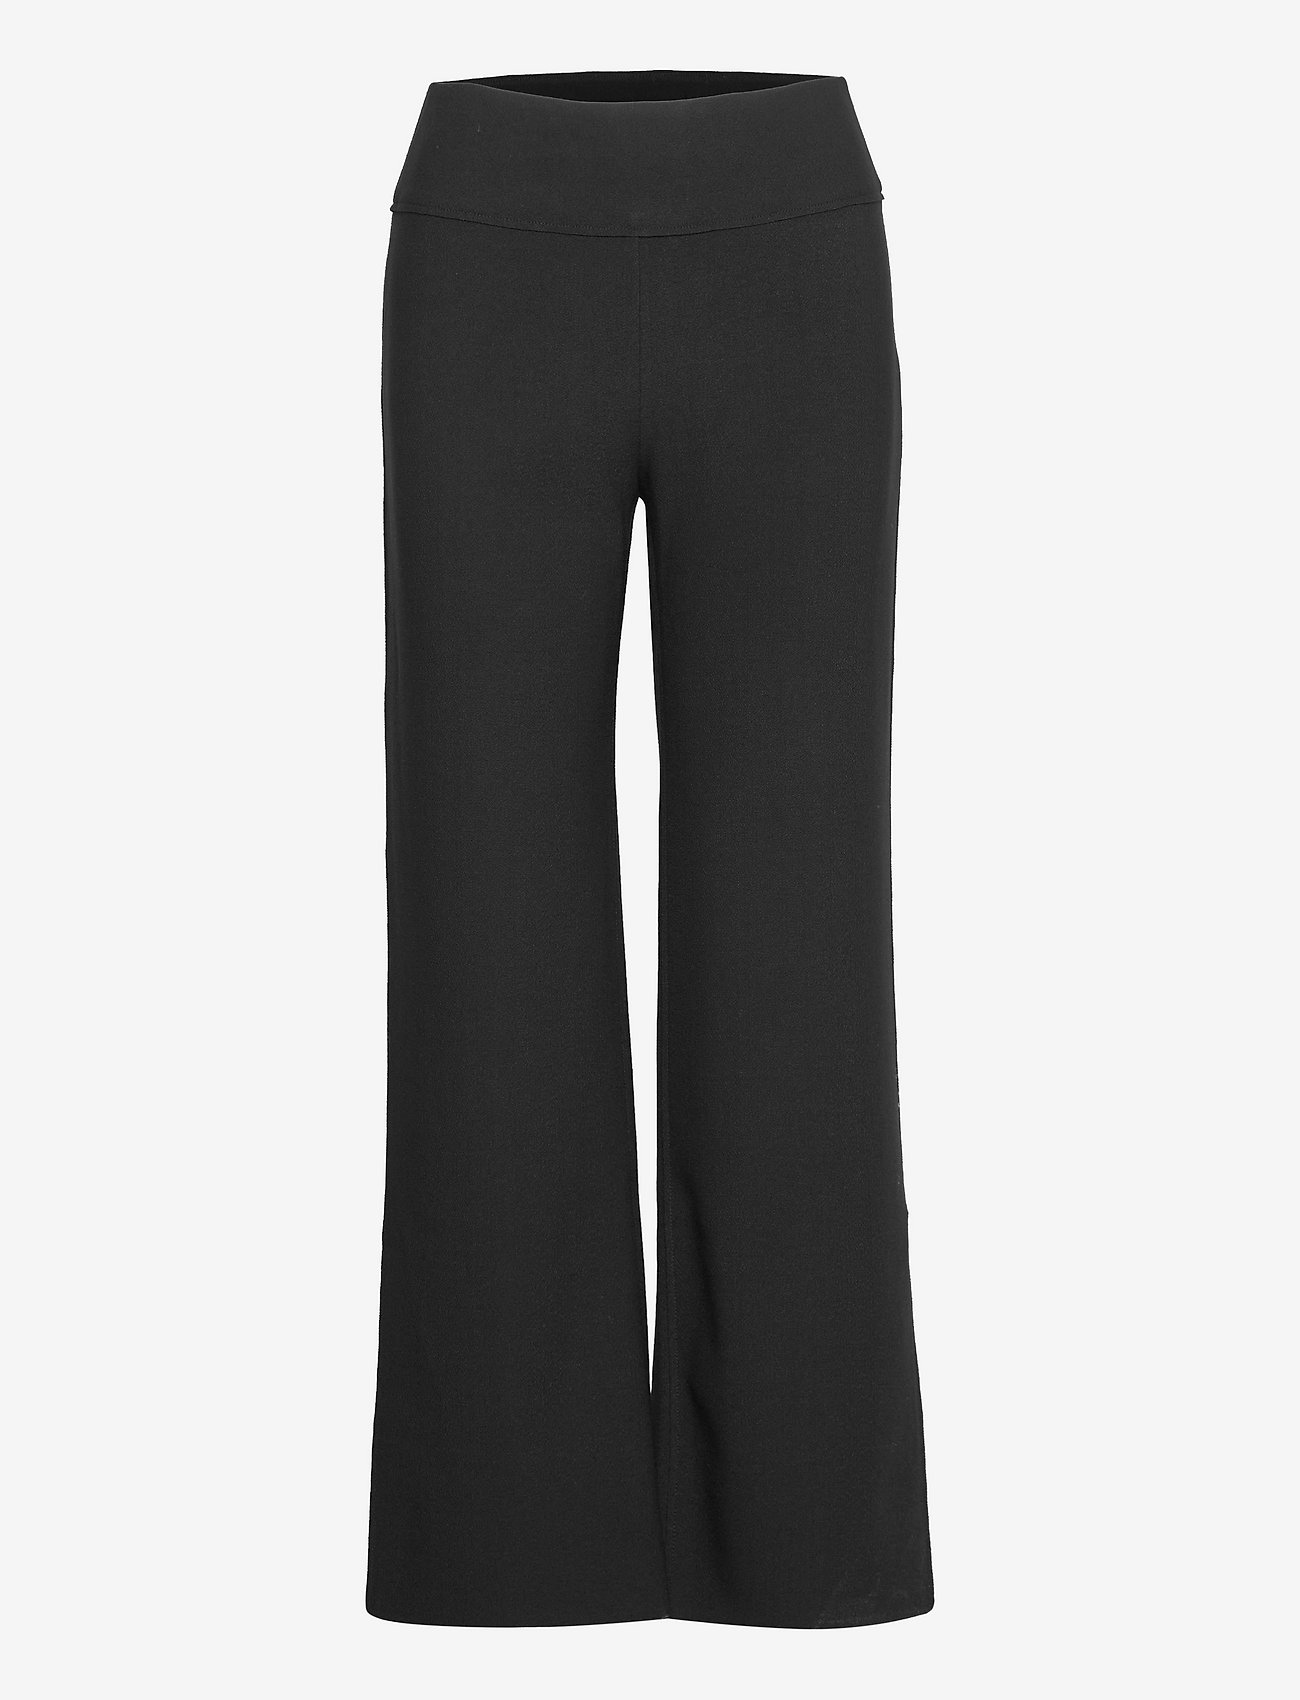 Marville Road - Angie Short Trousers - damen - black - 0